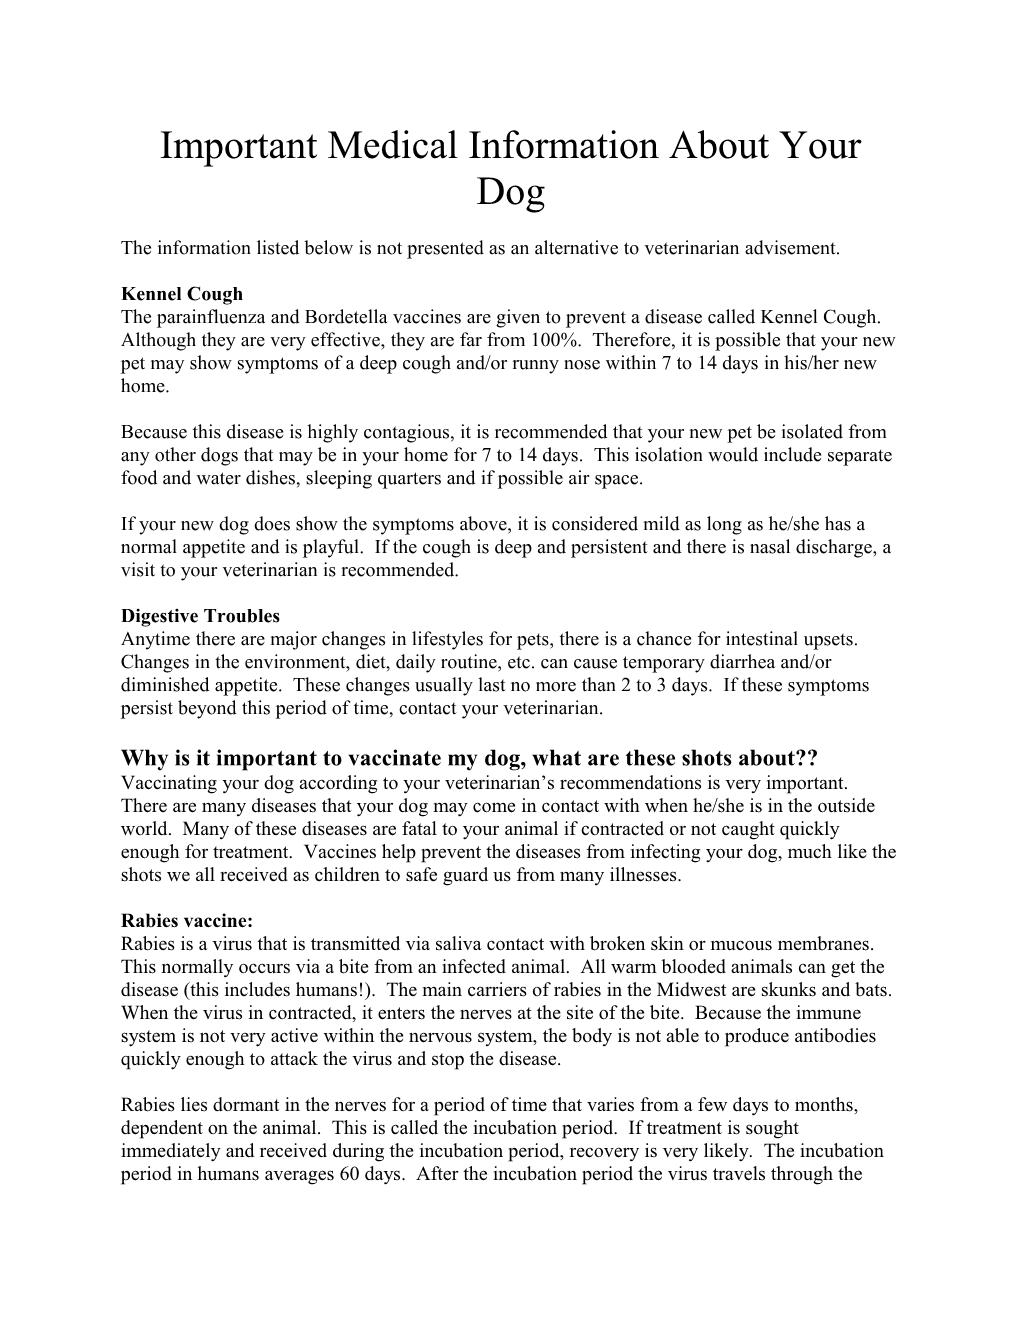 Important Medical Information About Your Dog